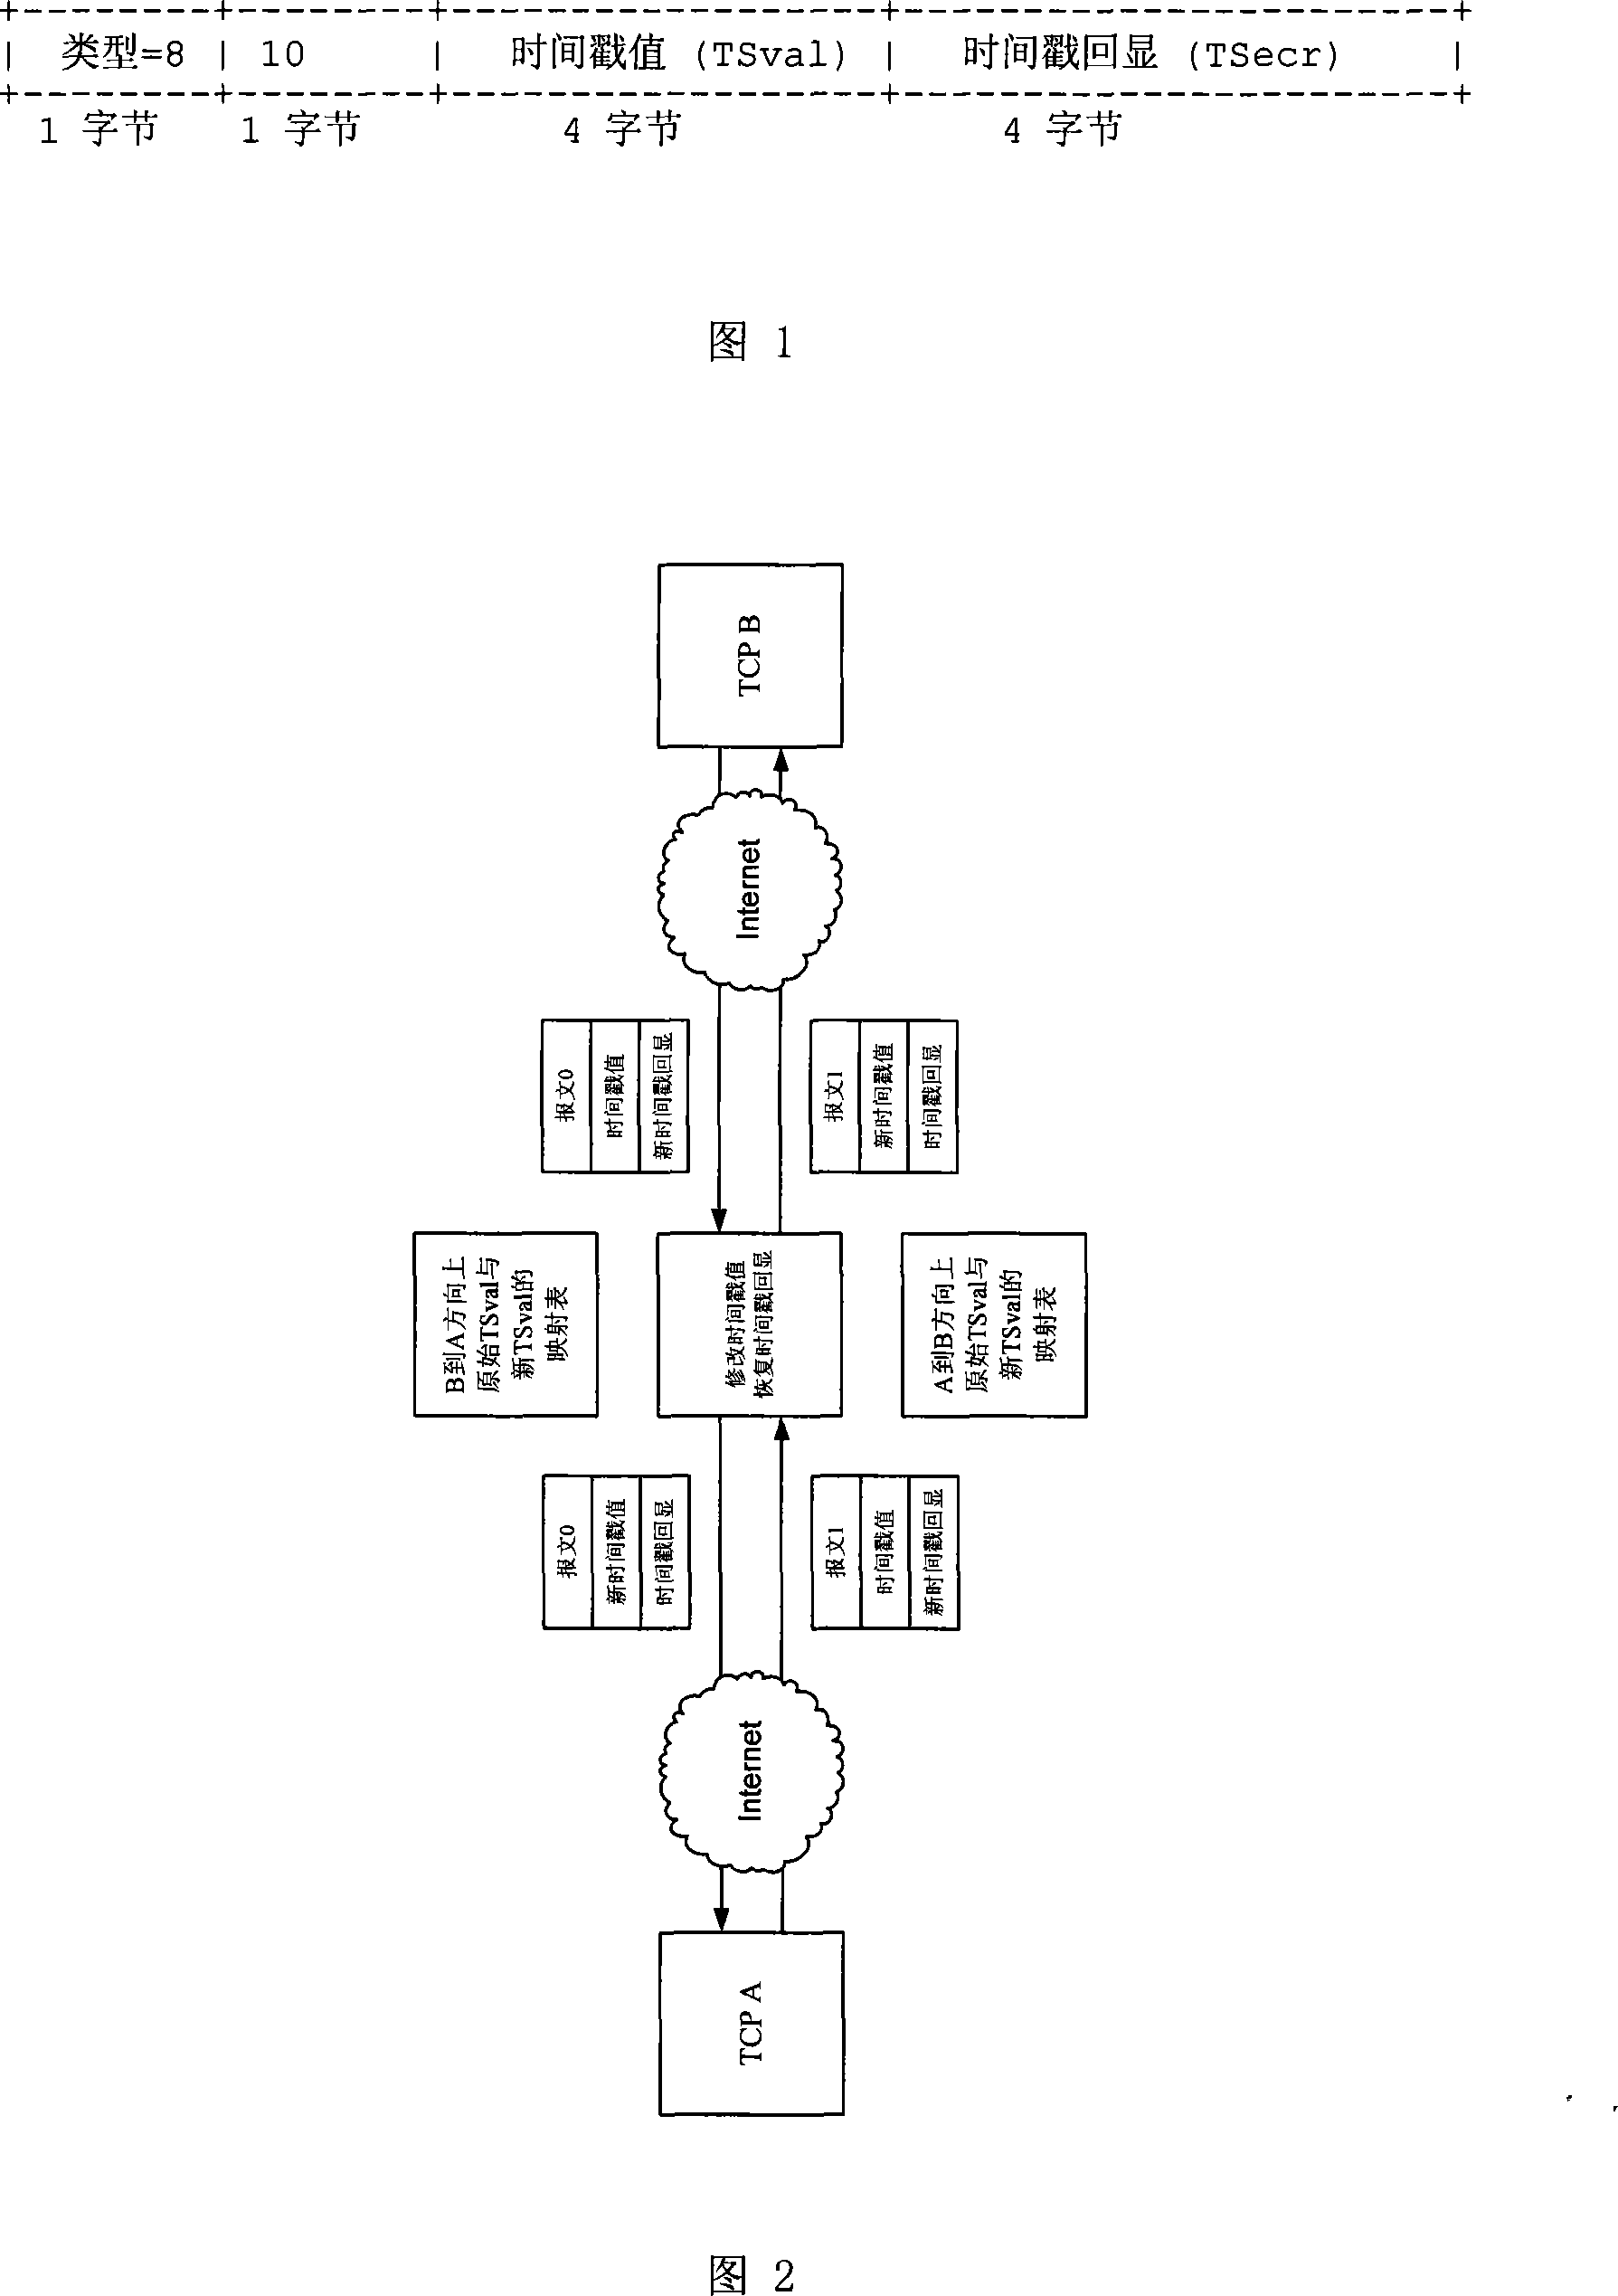 A determination method of the initiation relationship within TCP messages based on TCP timestamp options